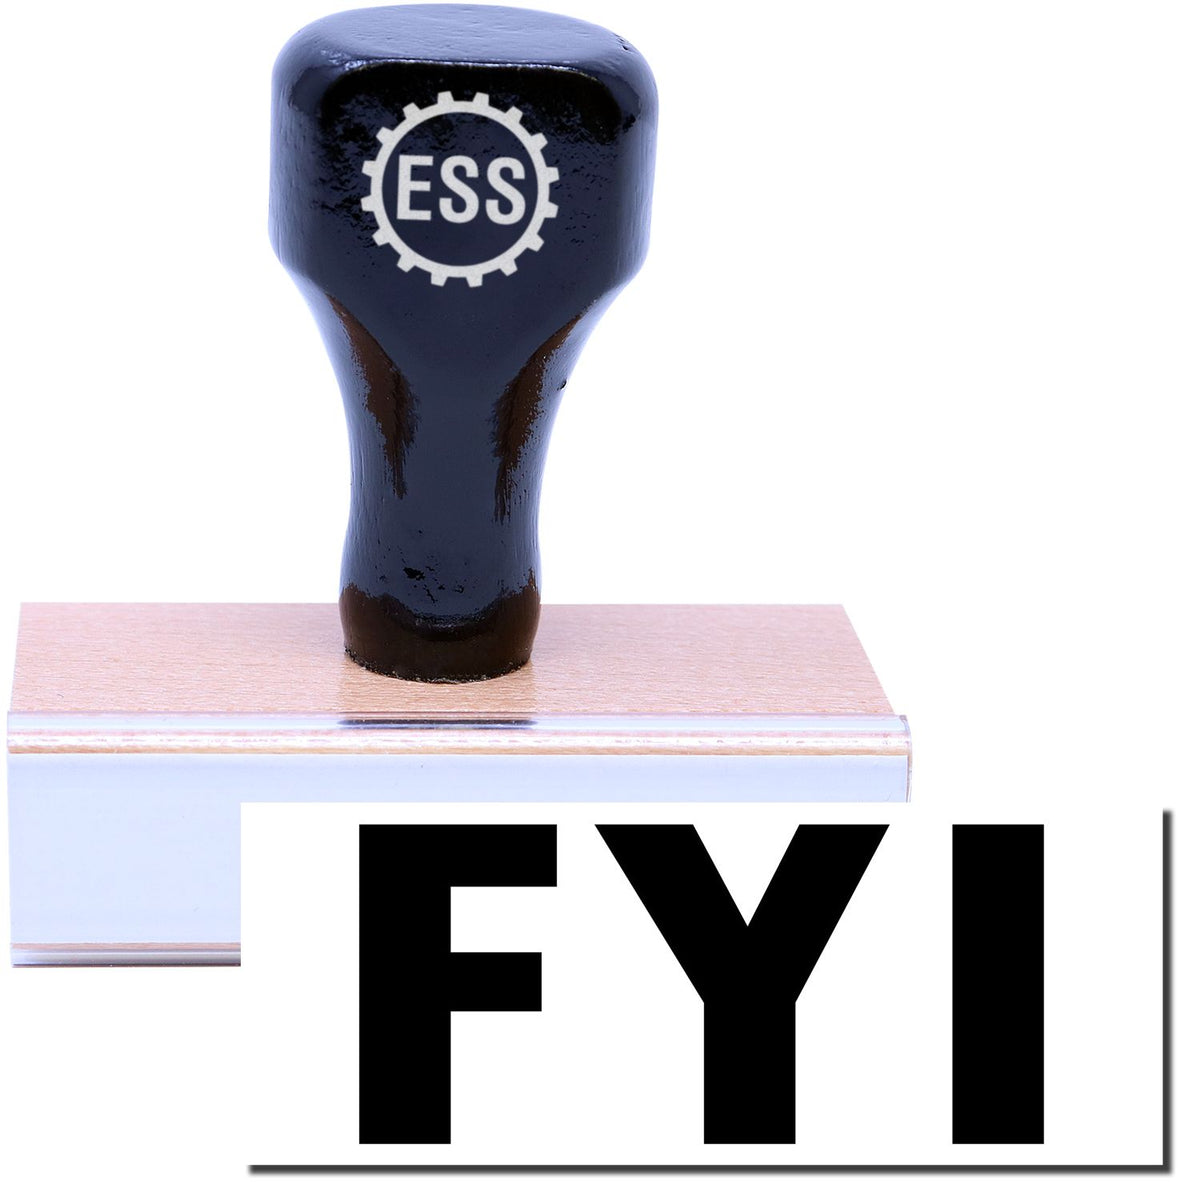 A stock office rubber stamp with a stamped image showing how the text &quot;FYI&quot; is displayed after stamping.